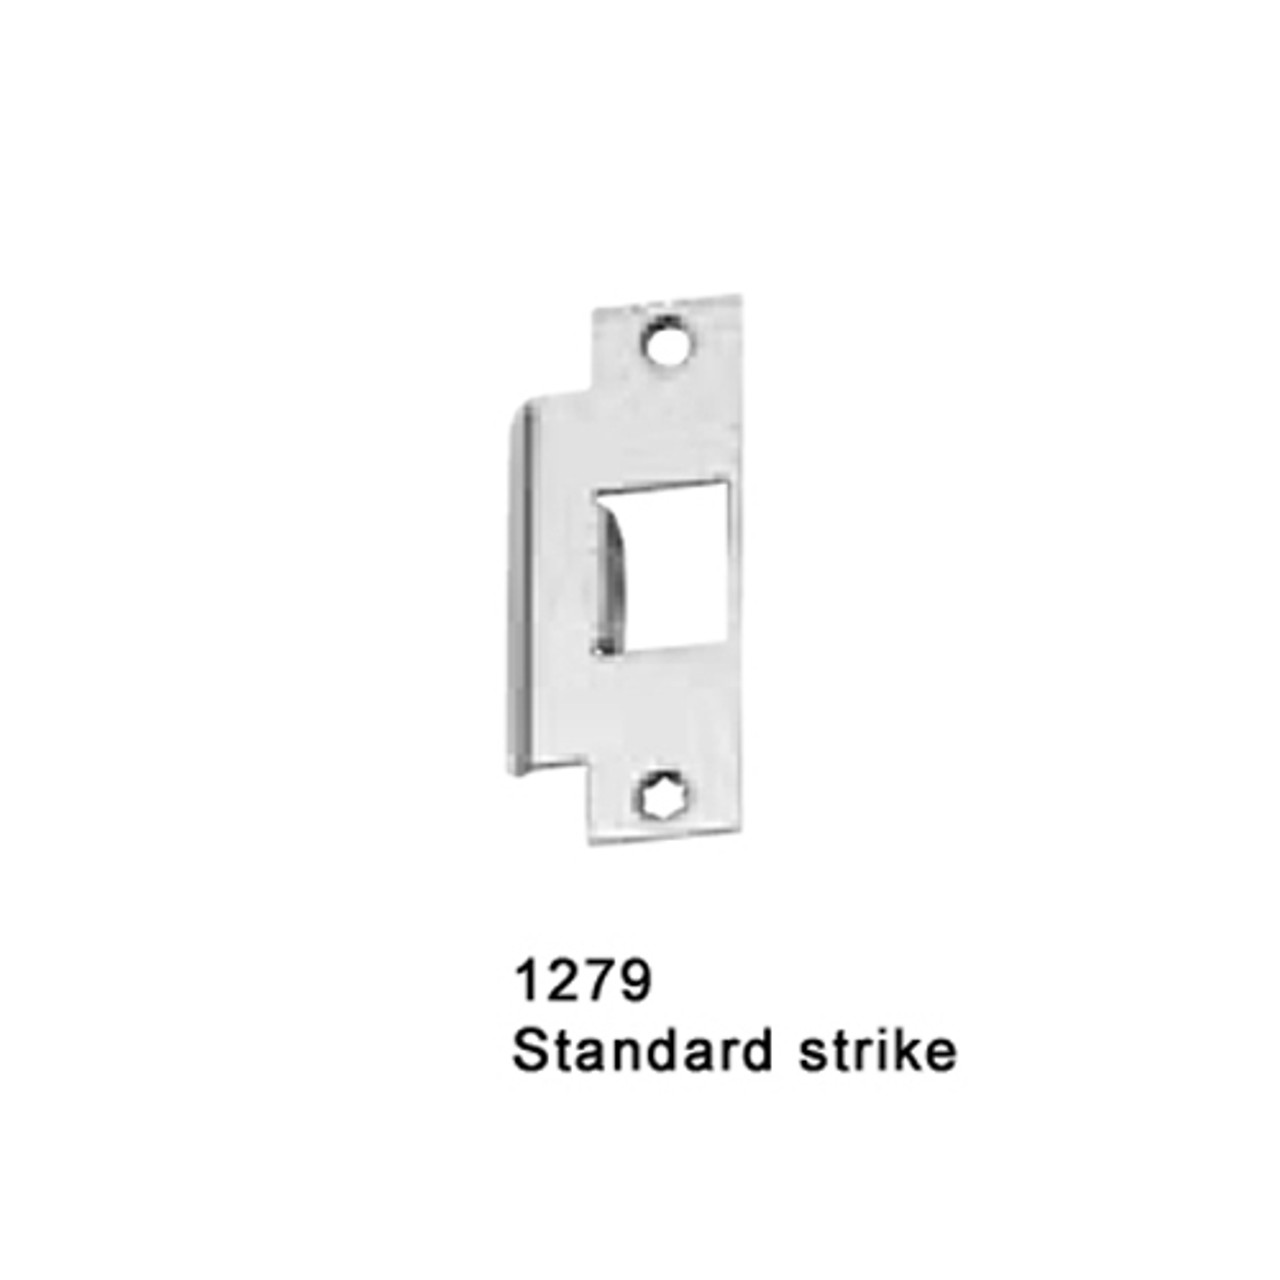 CD25-M-L-BE-DANE-US26-4-RHR Falcon 25 Series Mortise Lock Devices 510L-BE Dane Lever Trim with Blank Escutcheon in Polished Chrome